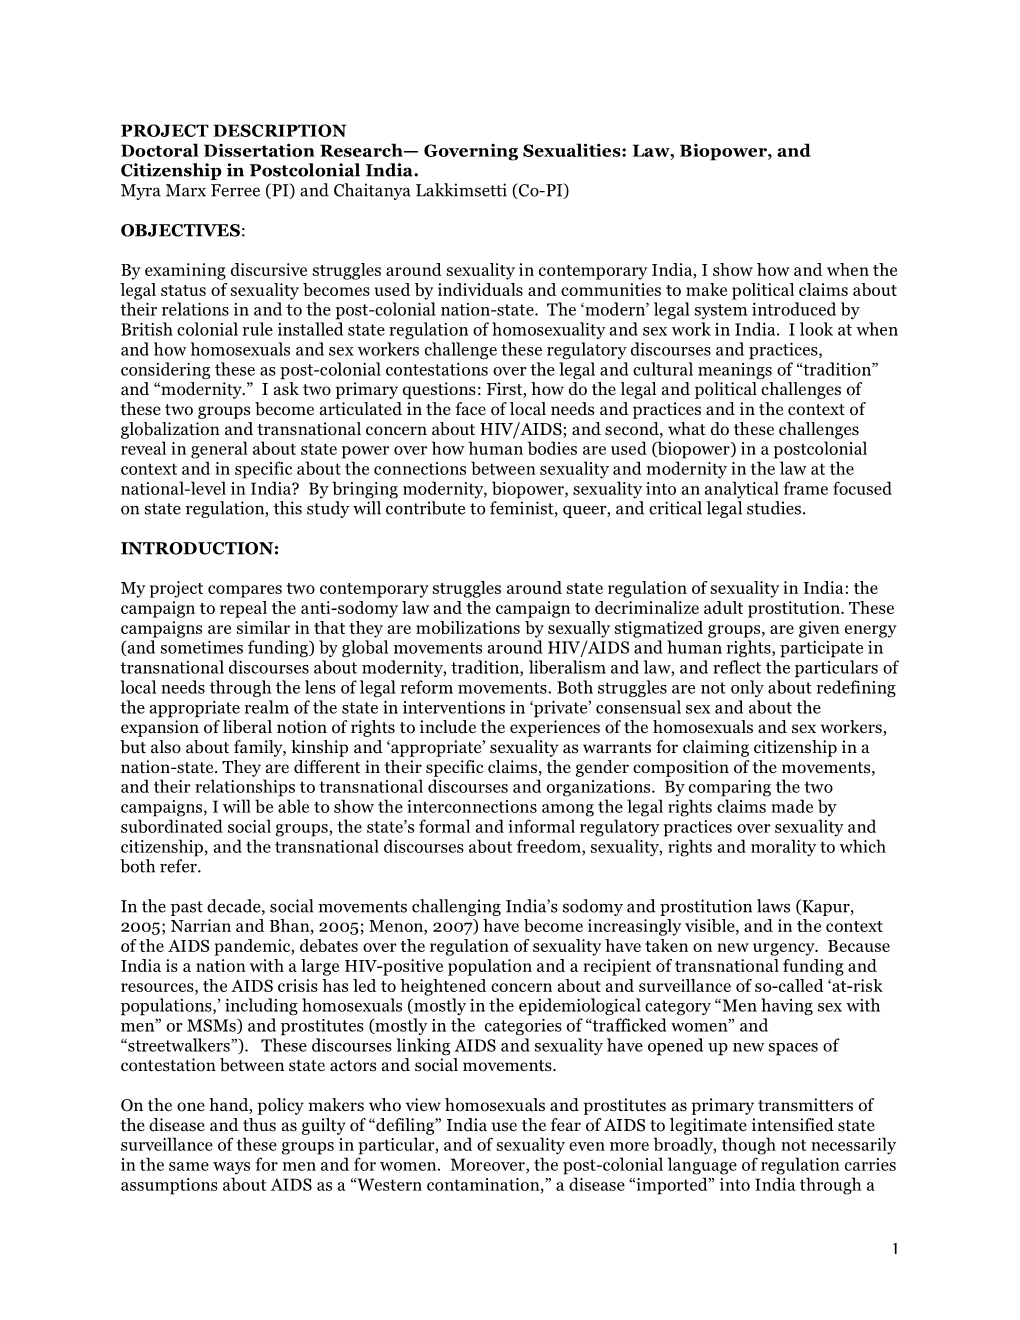 PROJECT DESCRIPTION Doctoral Dissertation Research— Governing Sexualities: Law, Biopower, and Citizenship in Postcolonial India